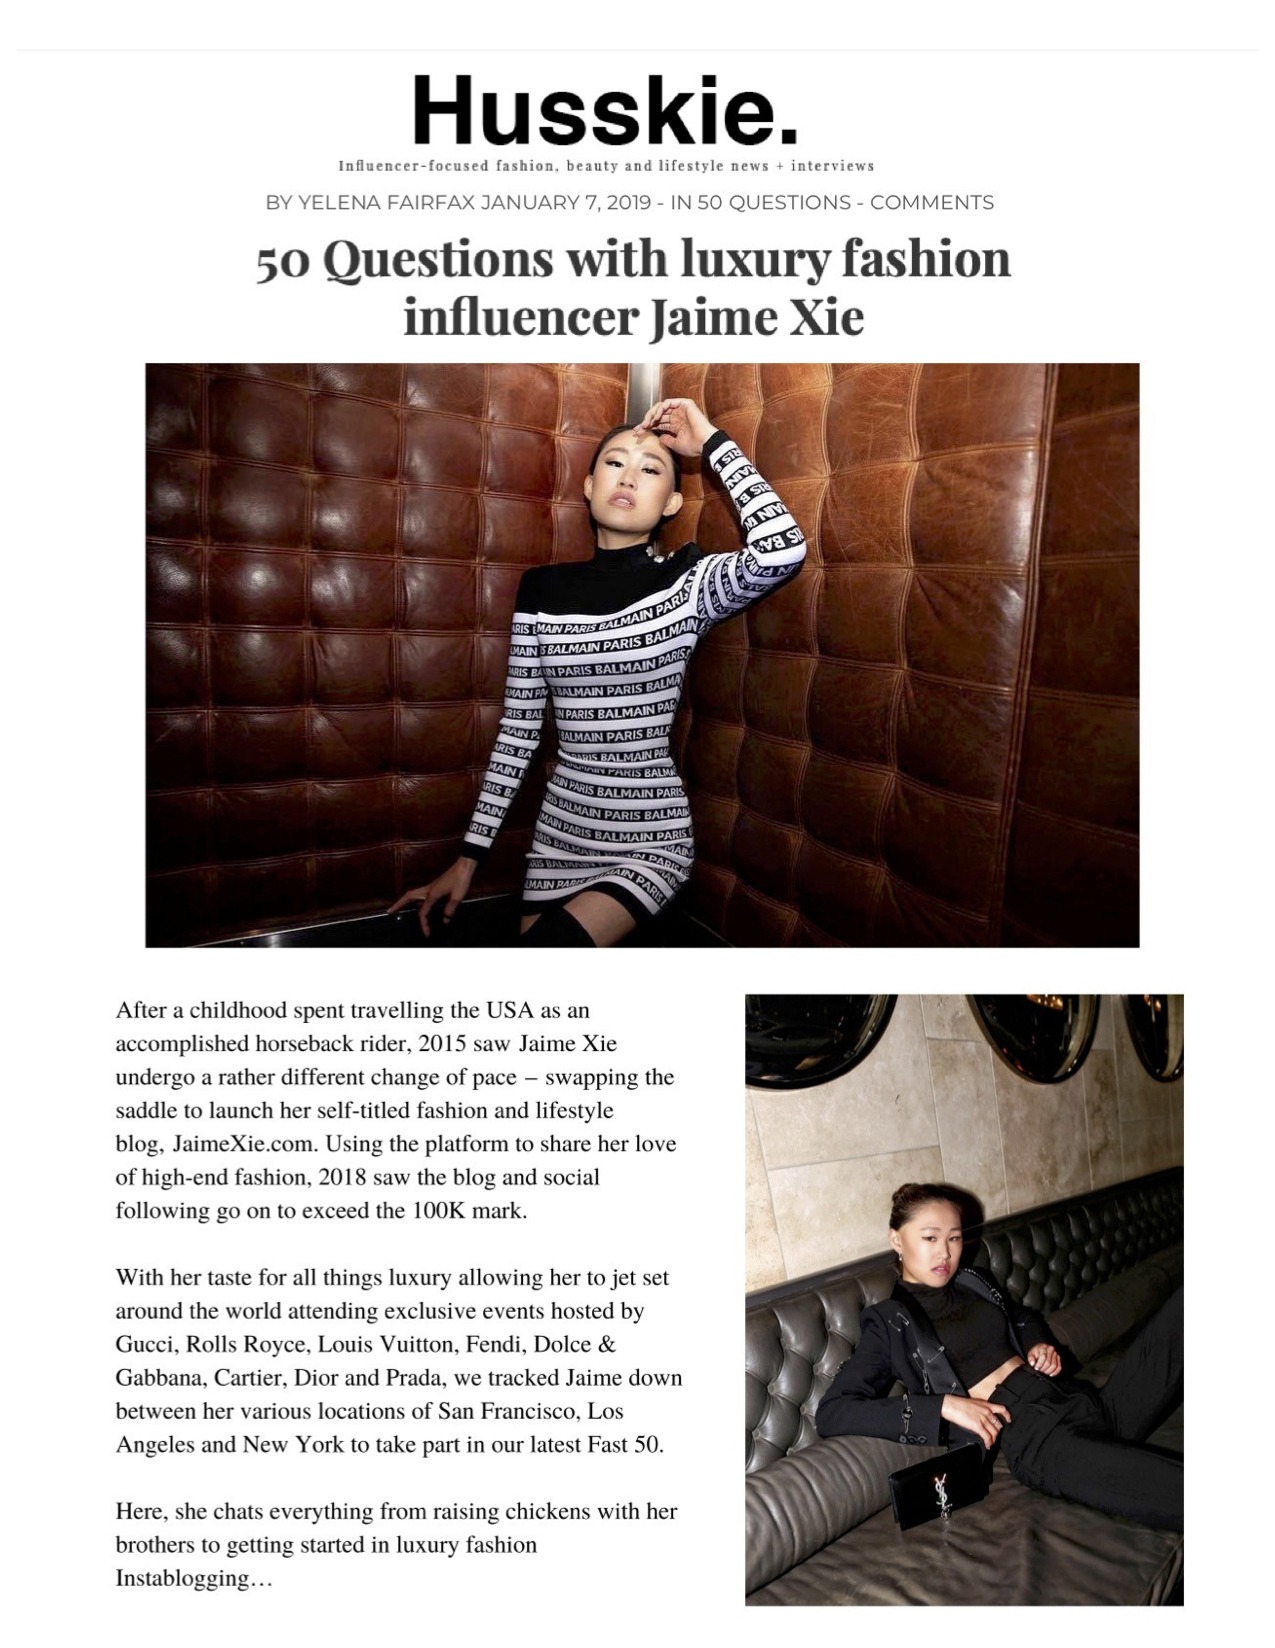 Husskie: 50 Questions with Luxury Fashion Influencer Jaime Xie